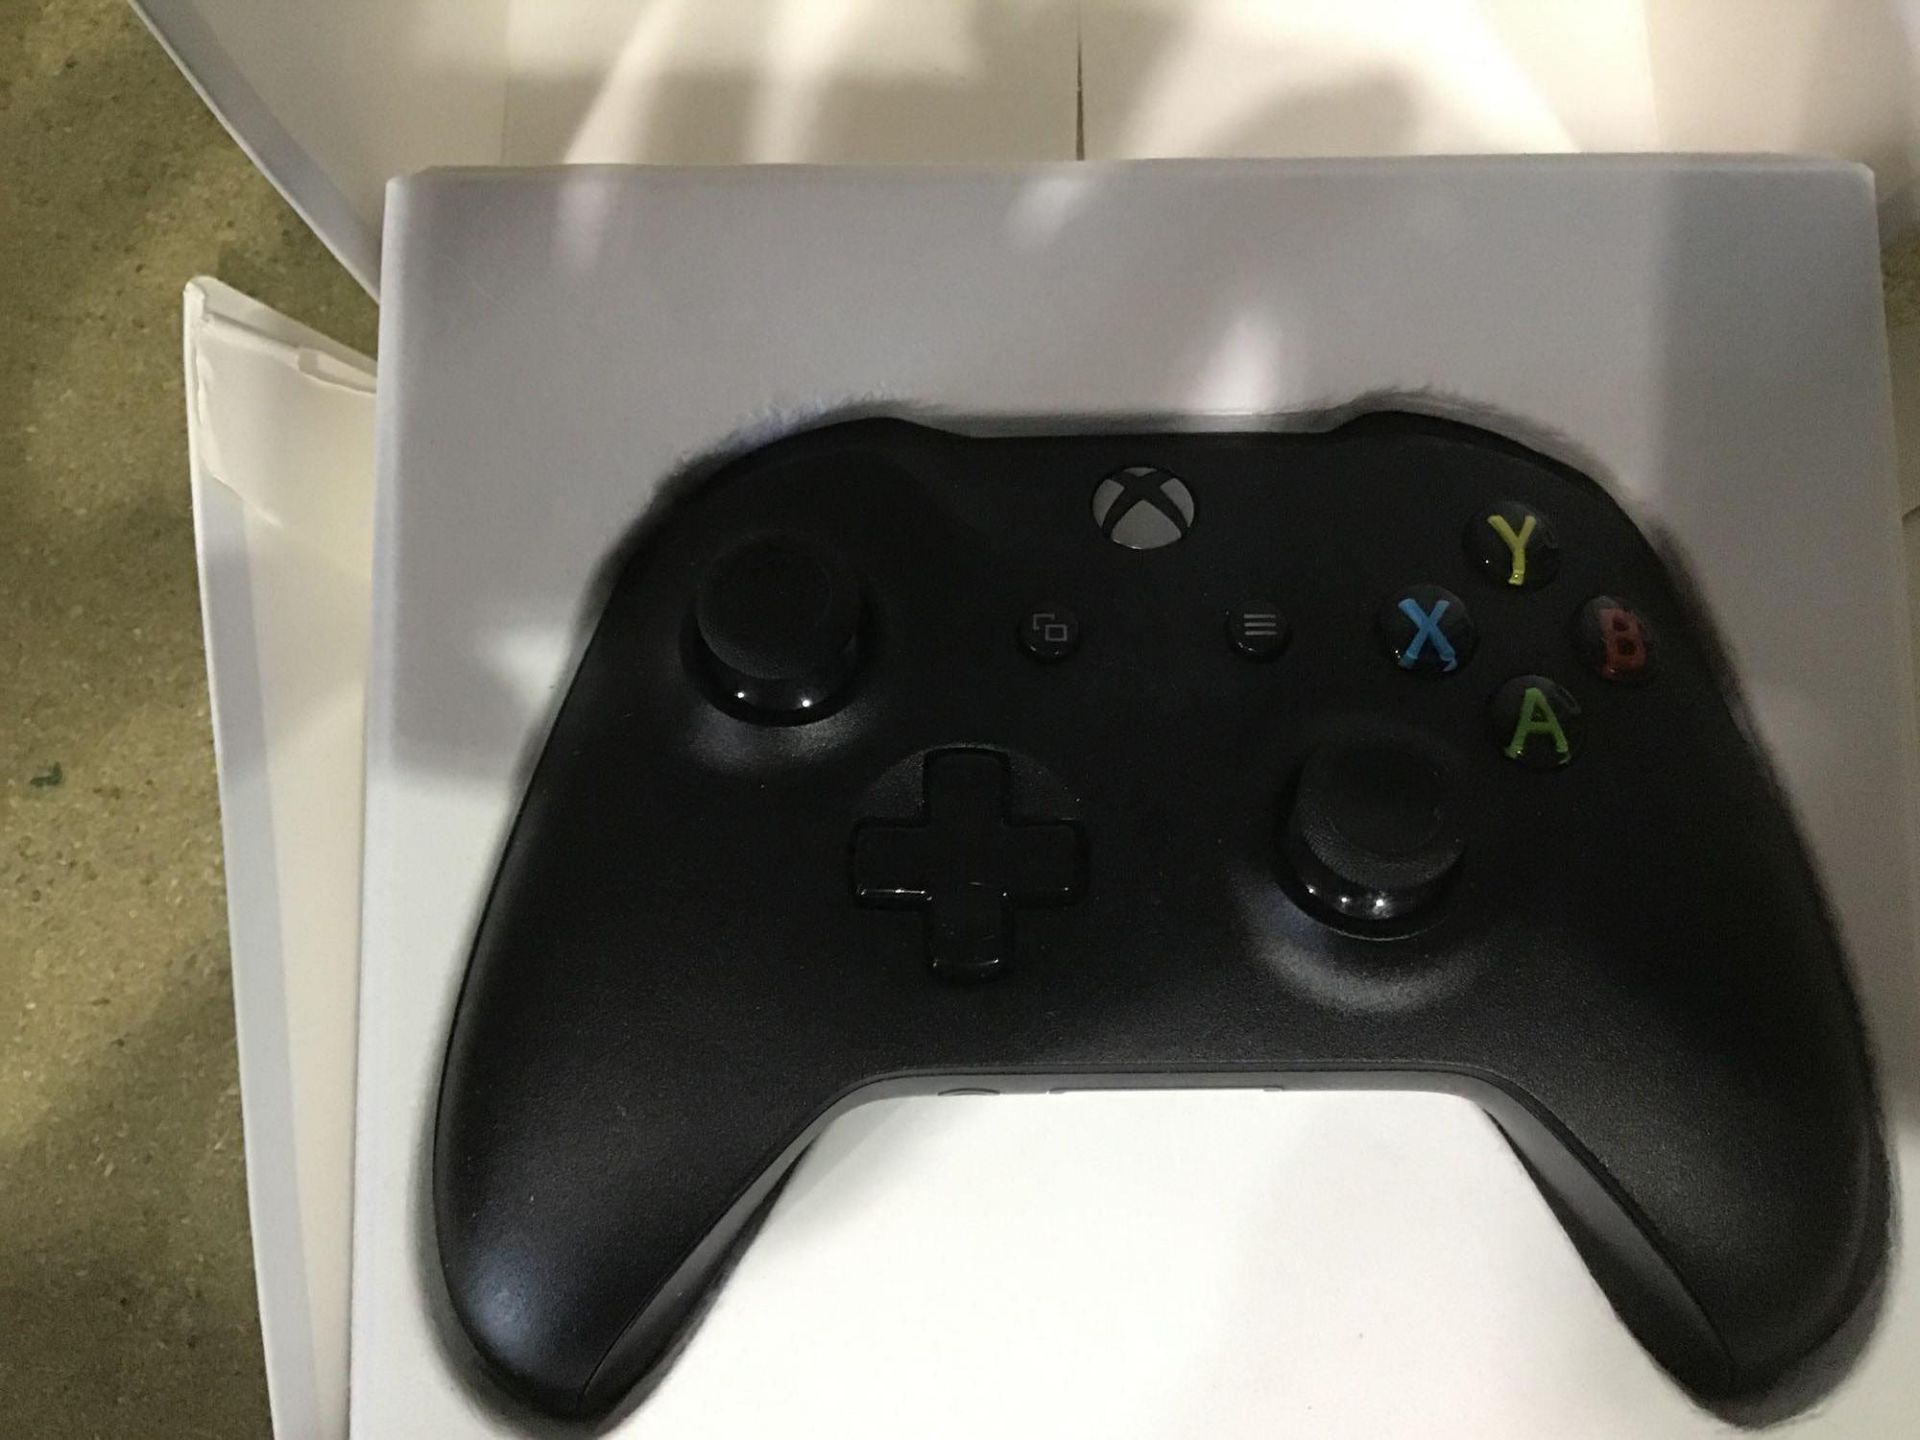 Official Xbox One Wireless Controller - Black 619/9582 £49.99 RRP - Image 2 of 4